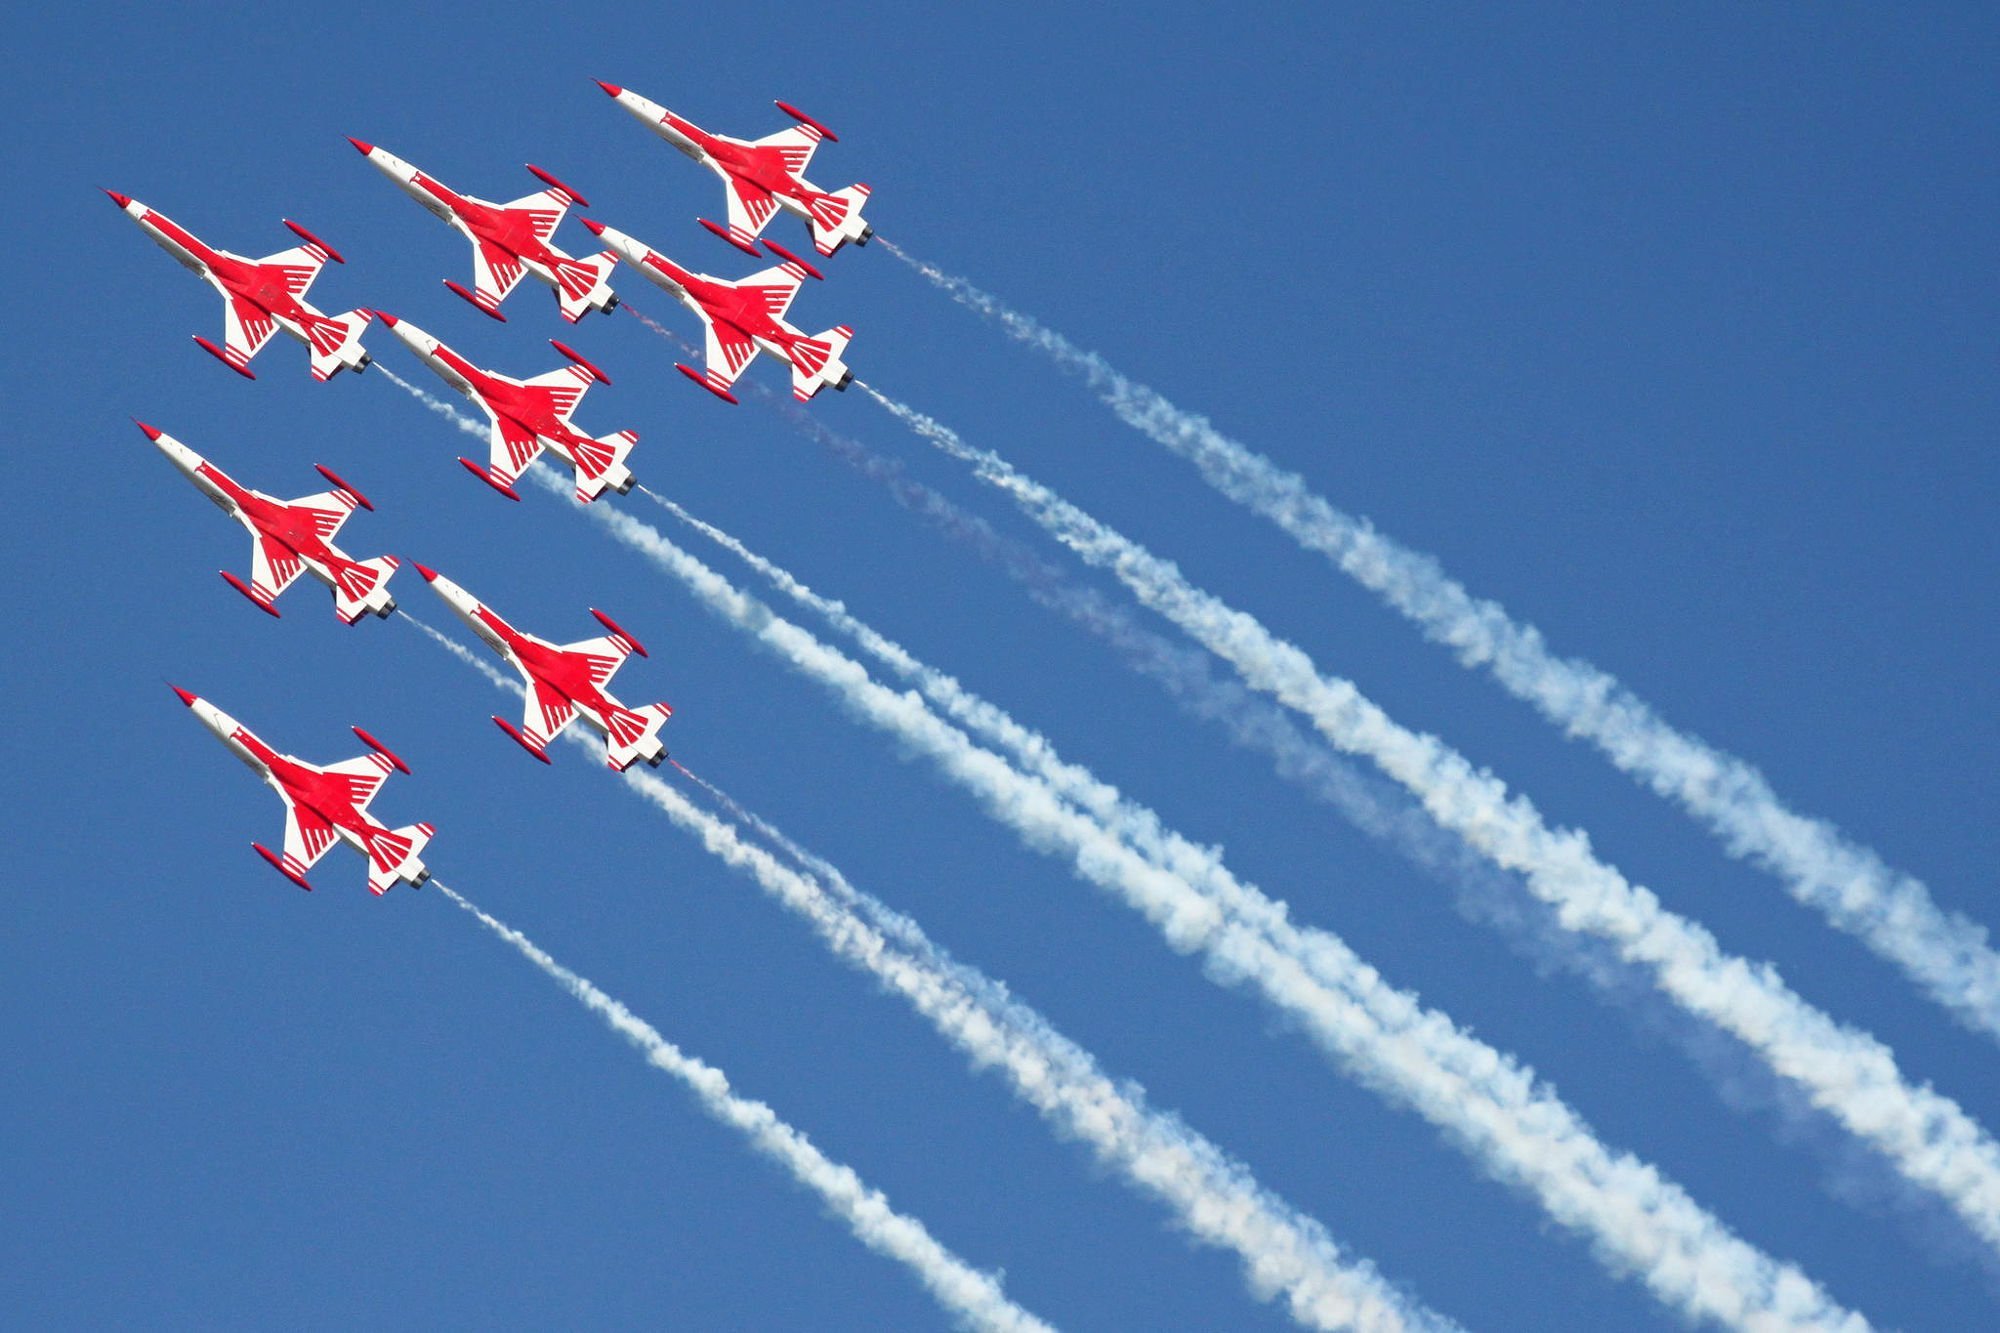 Contrast aircraft airshow jets formation demo team Turkish stars wallpaperx1333